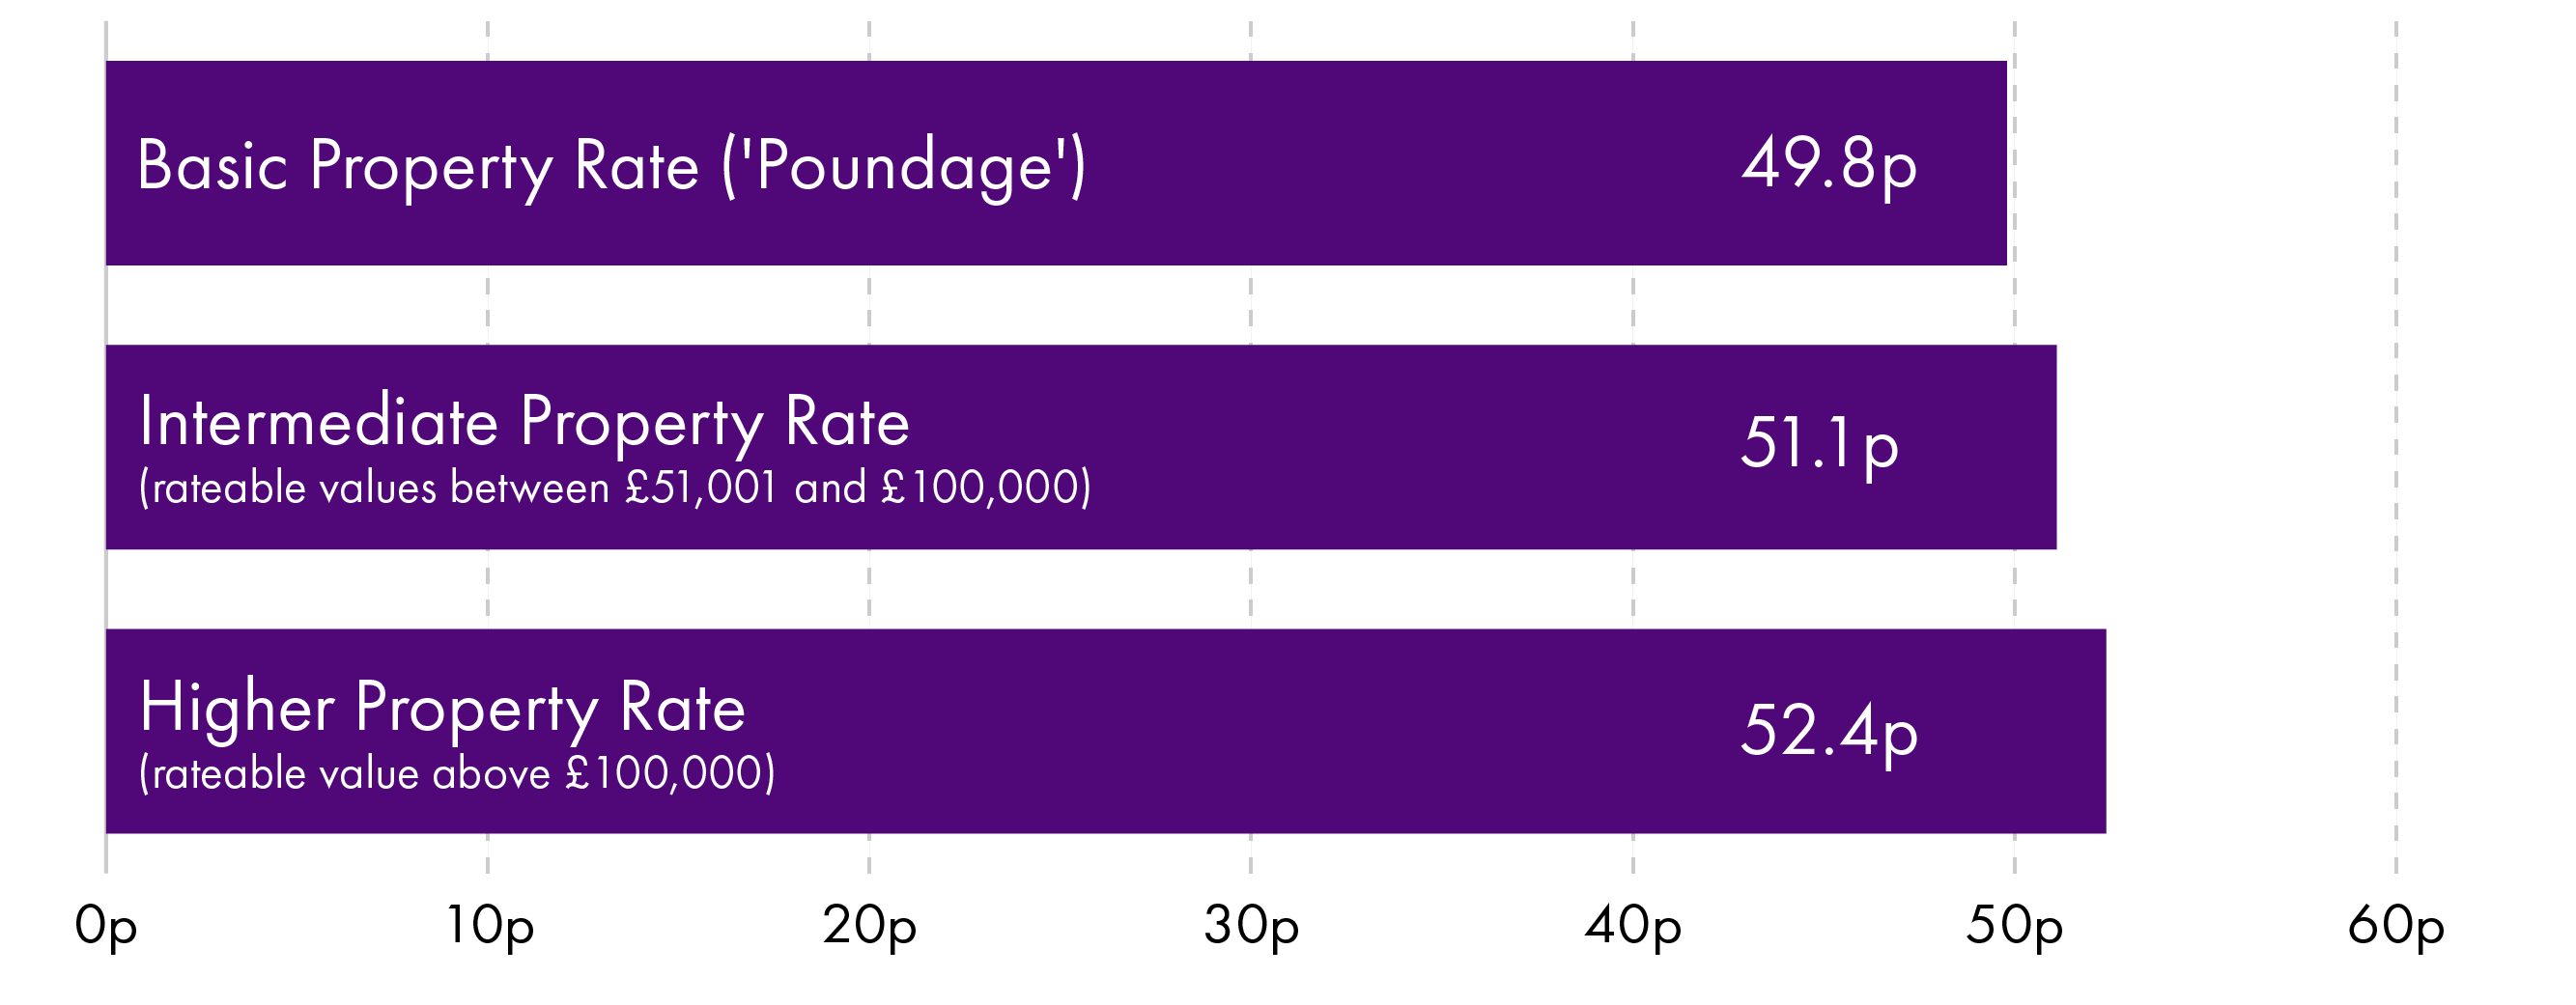 Bar chart showing poundage rates in Scotland in 2023-24, detail explained in the text.